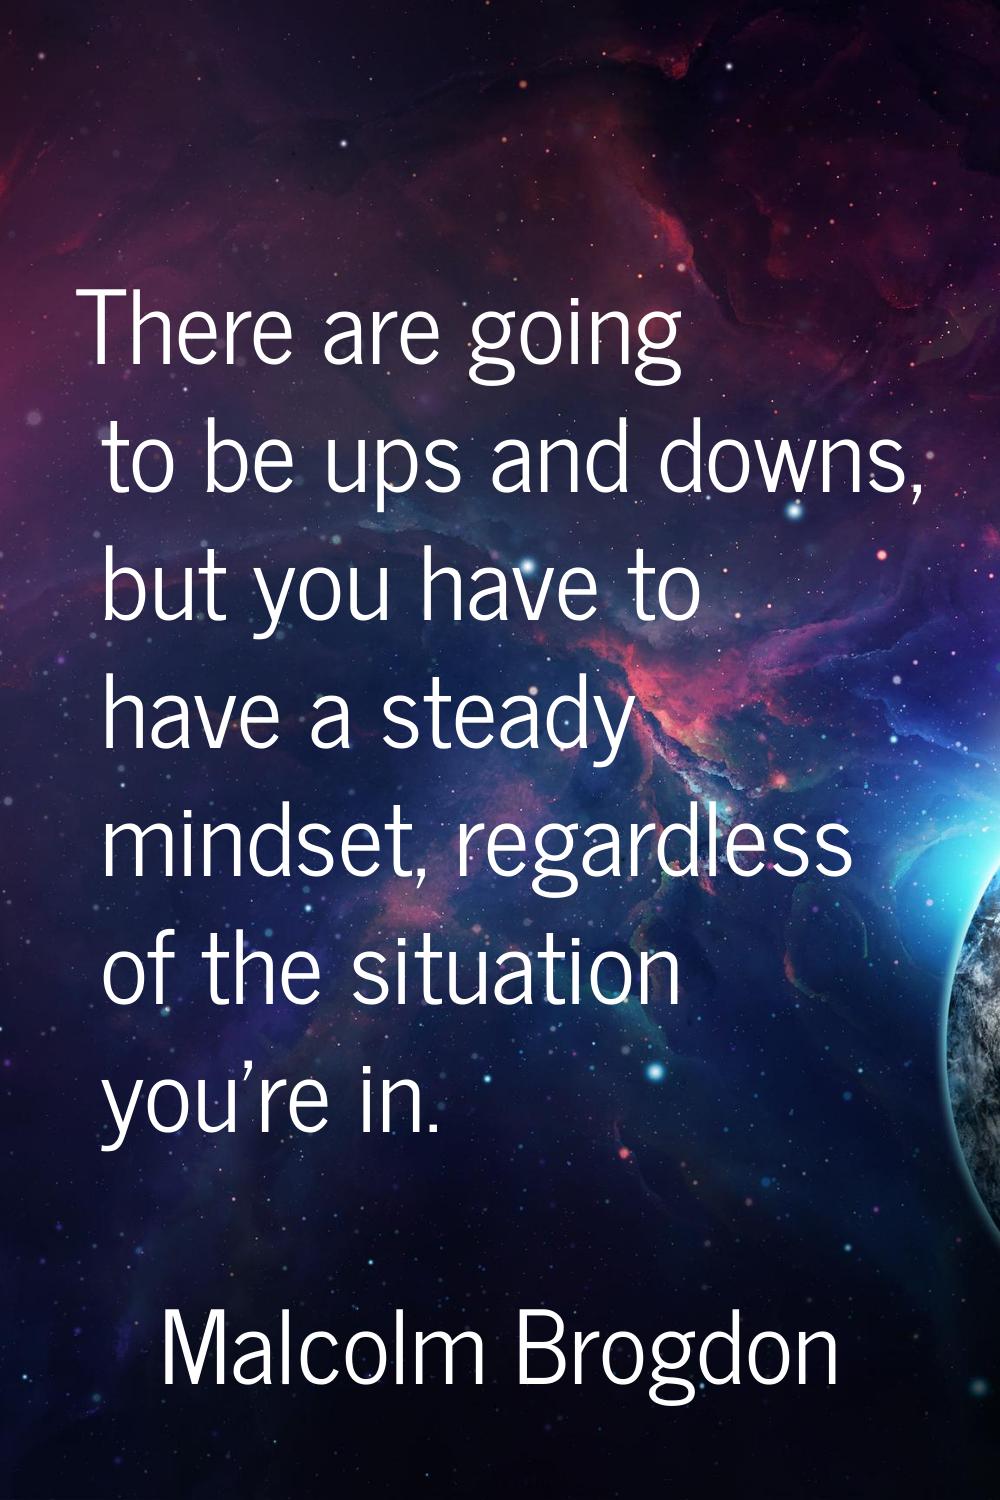 There are going to be ups and downs, but you have to have a steady mindset, regardless of the situa